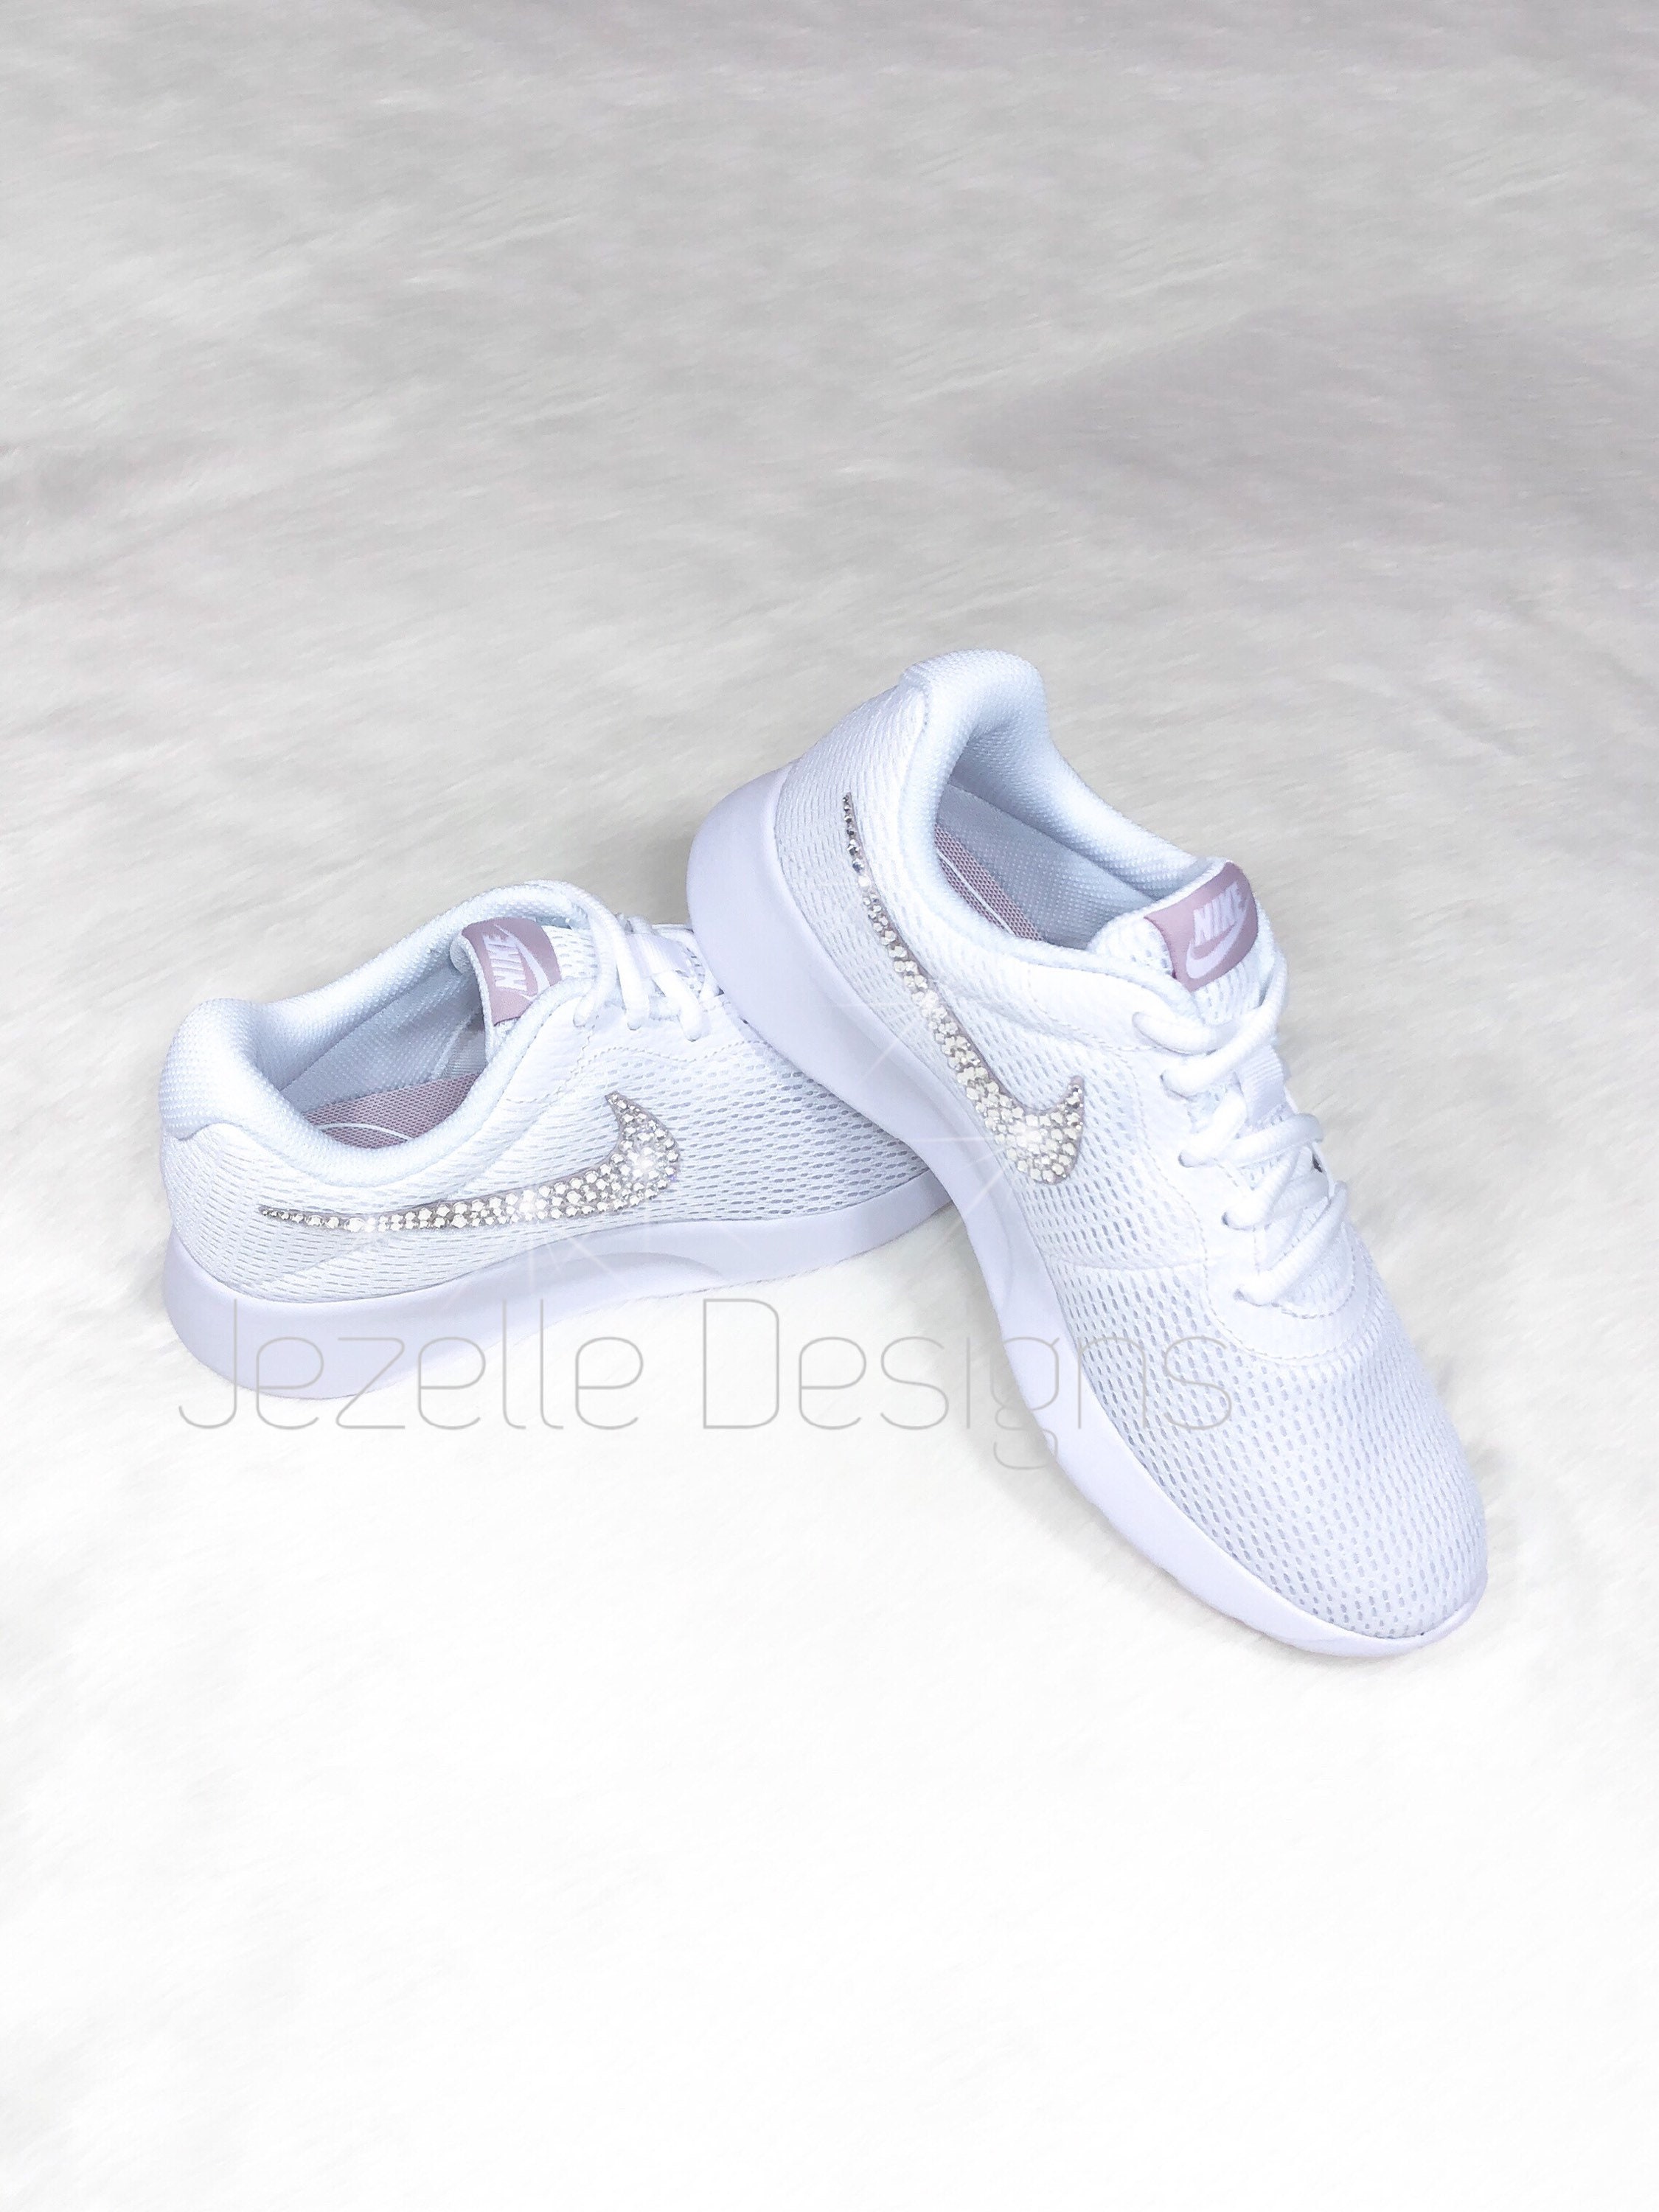 nike shoes with swarovski crystals